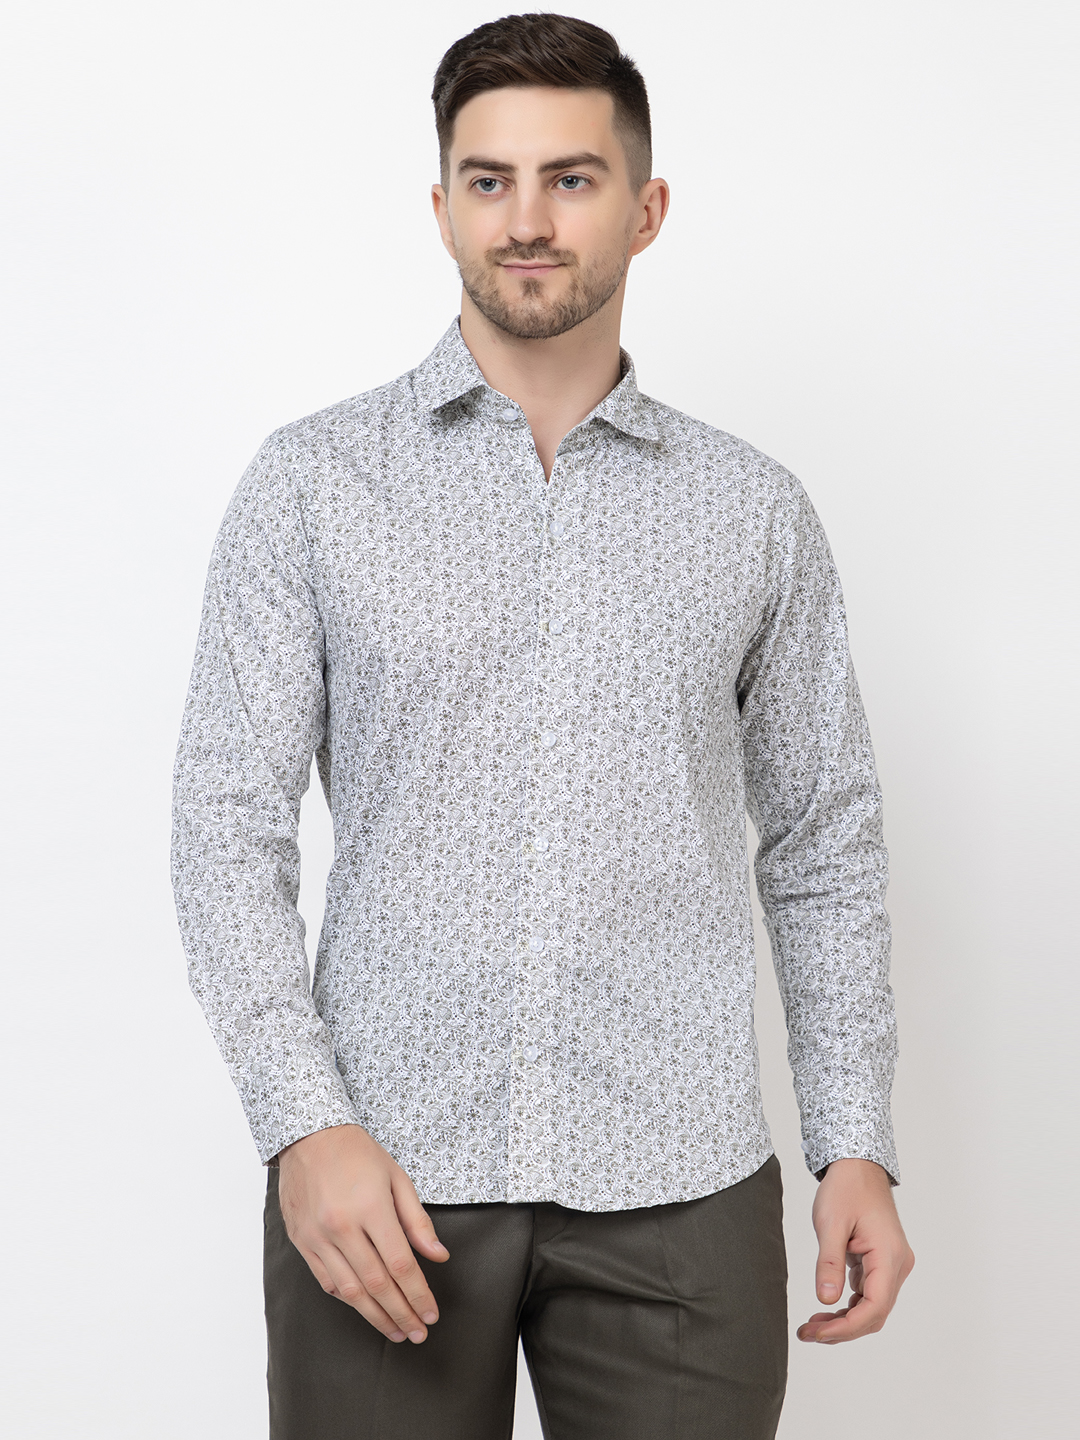 Buy Beige Printed Casual Shirt For Men Online In India - ExperianceClothing